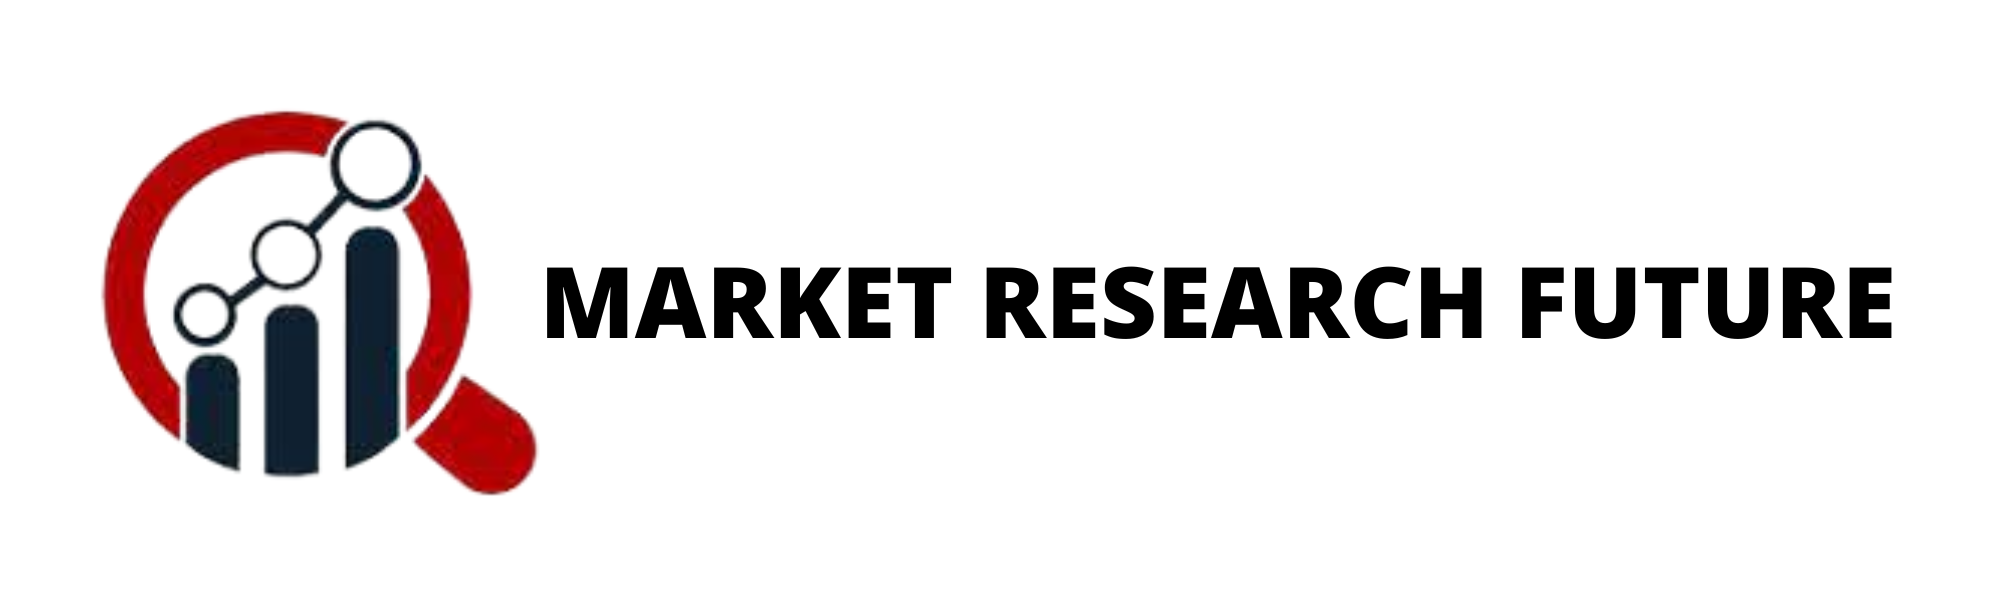 reactive dyes market Size, Research Analysis Including Growth...